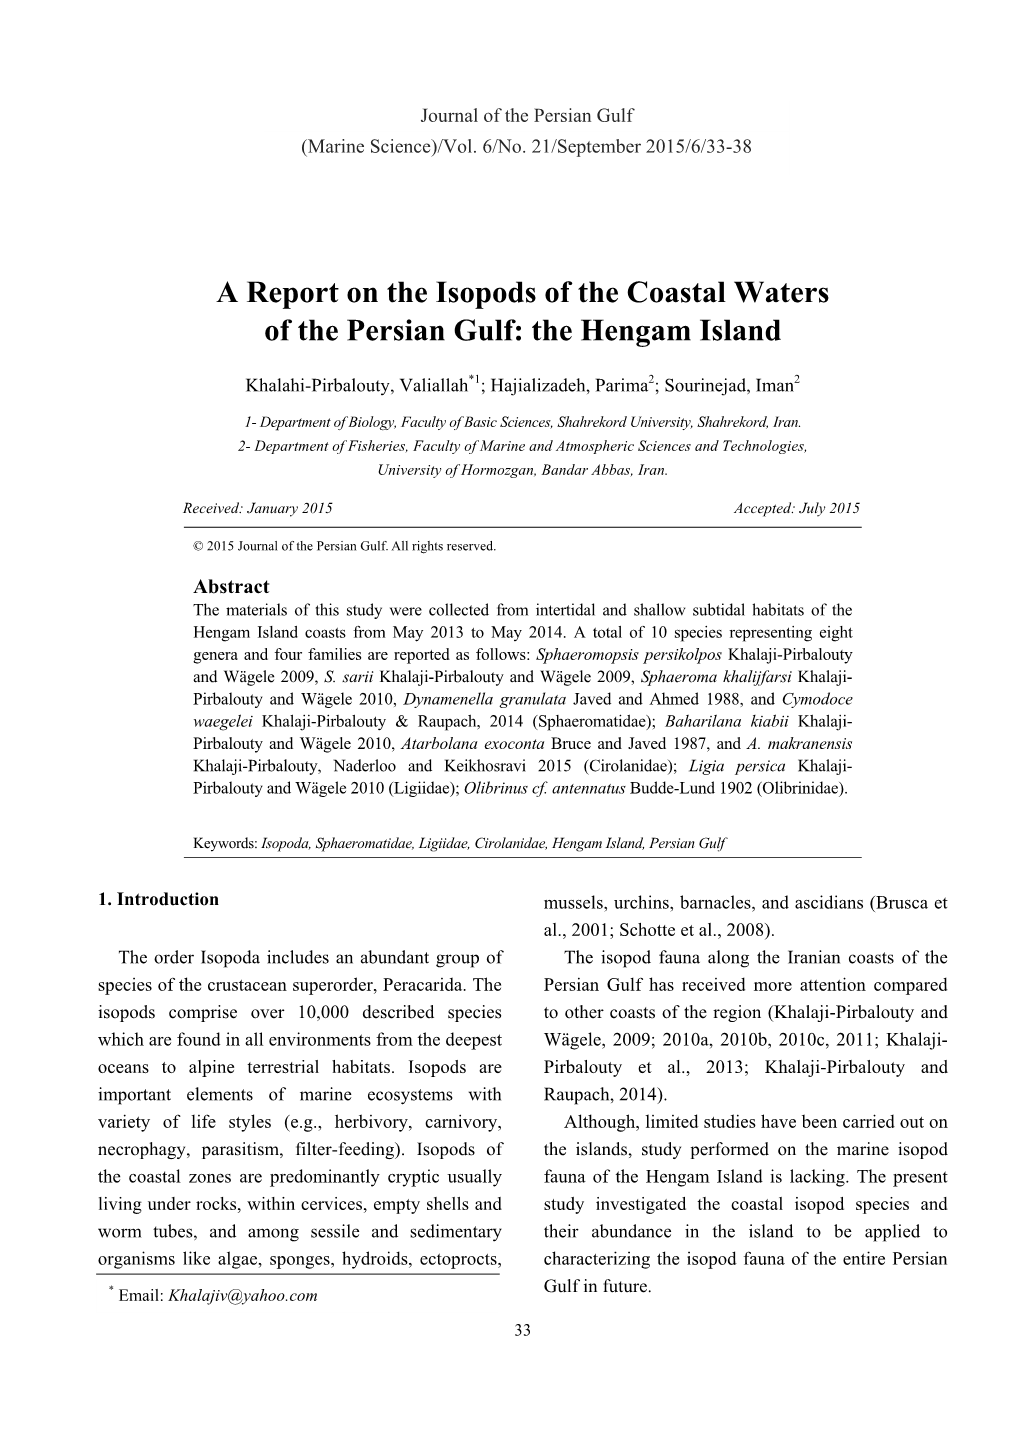 A Report on the Isopods of the Coastal Waters of the Persian Gulf: the Hengam Island